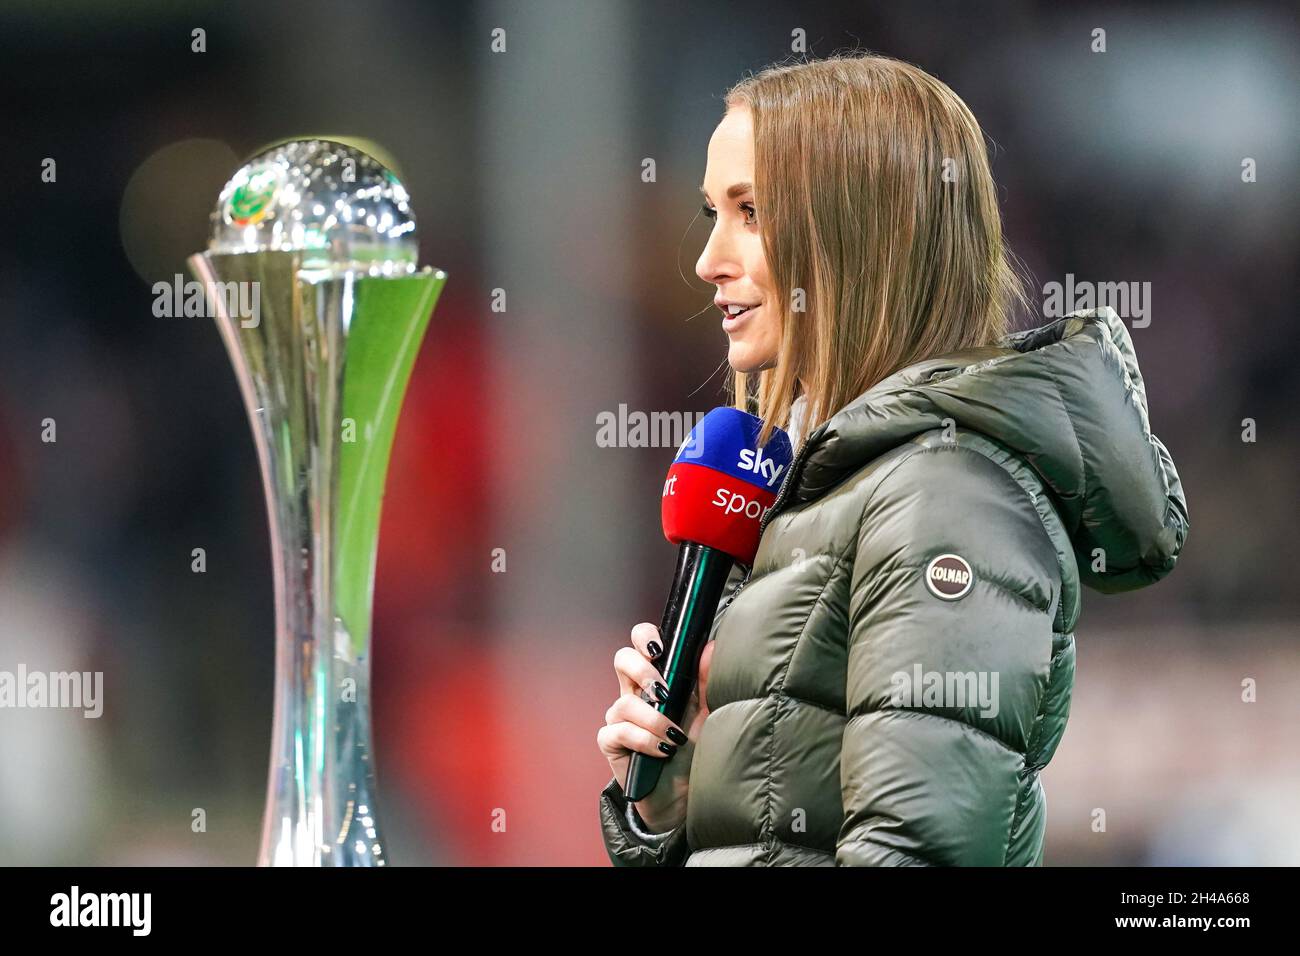 Page 3 - Football Tv Presenter High Resolution Stock Photography and Images  - Alamy